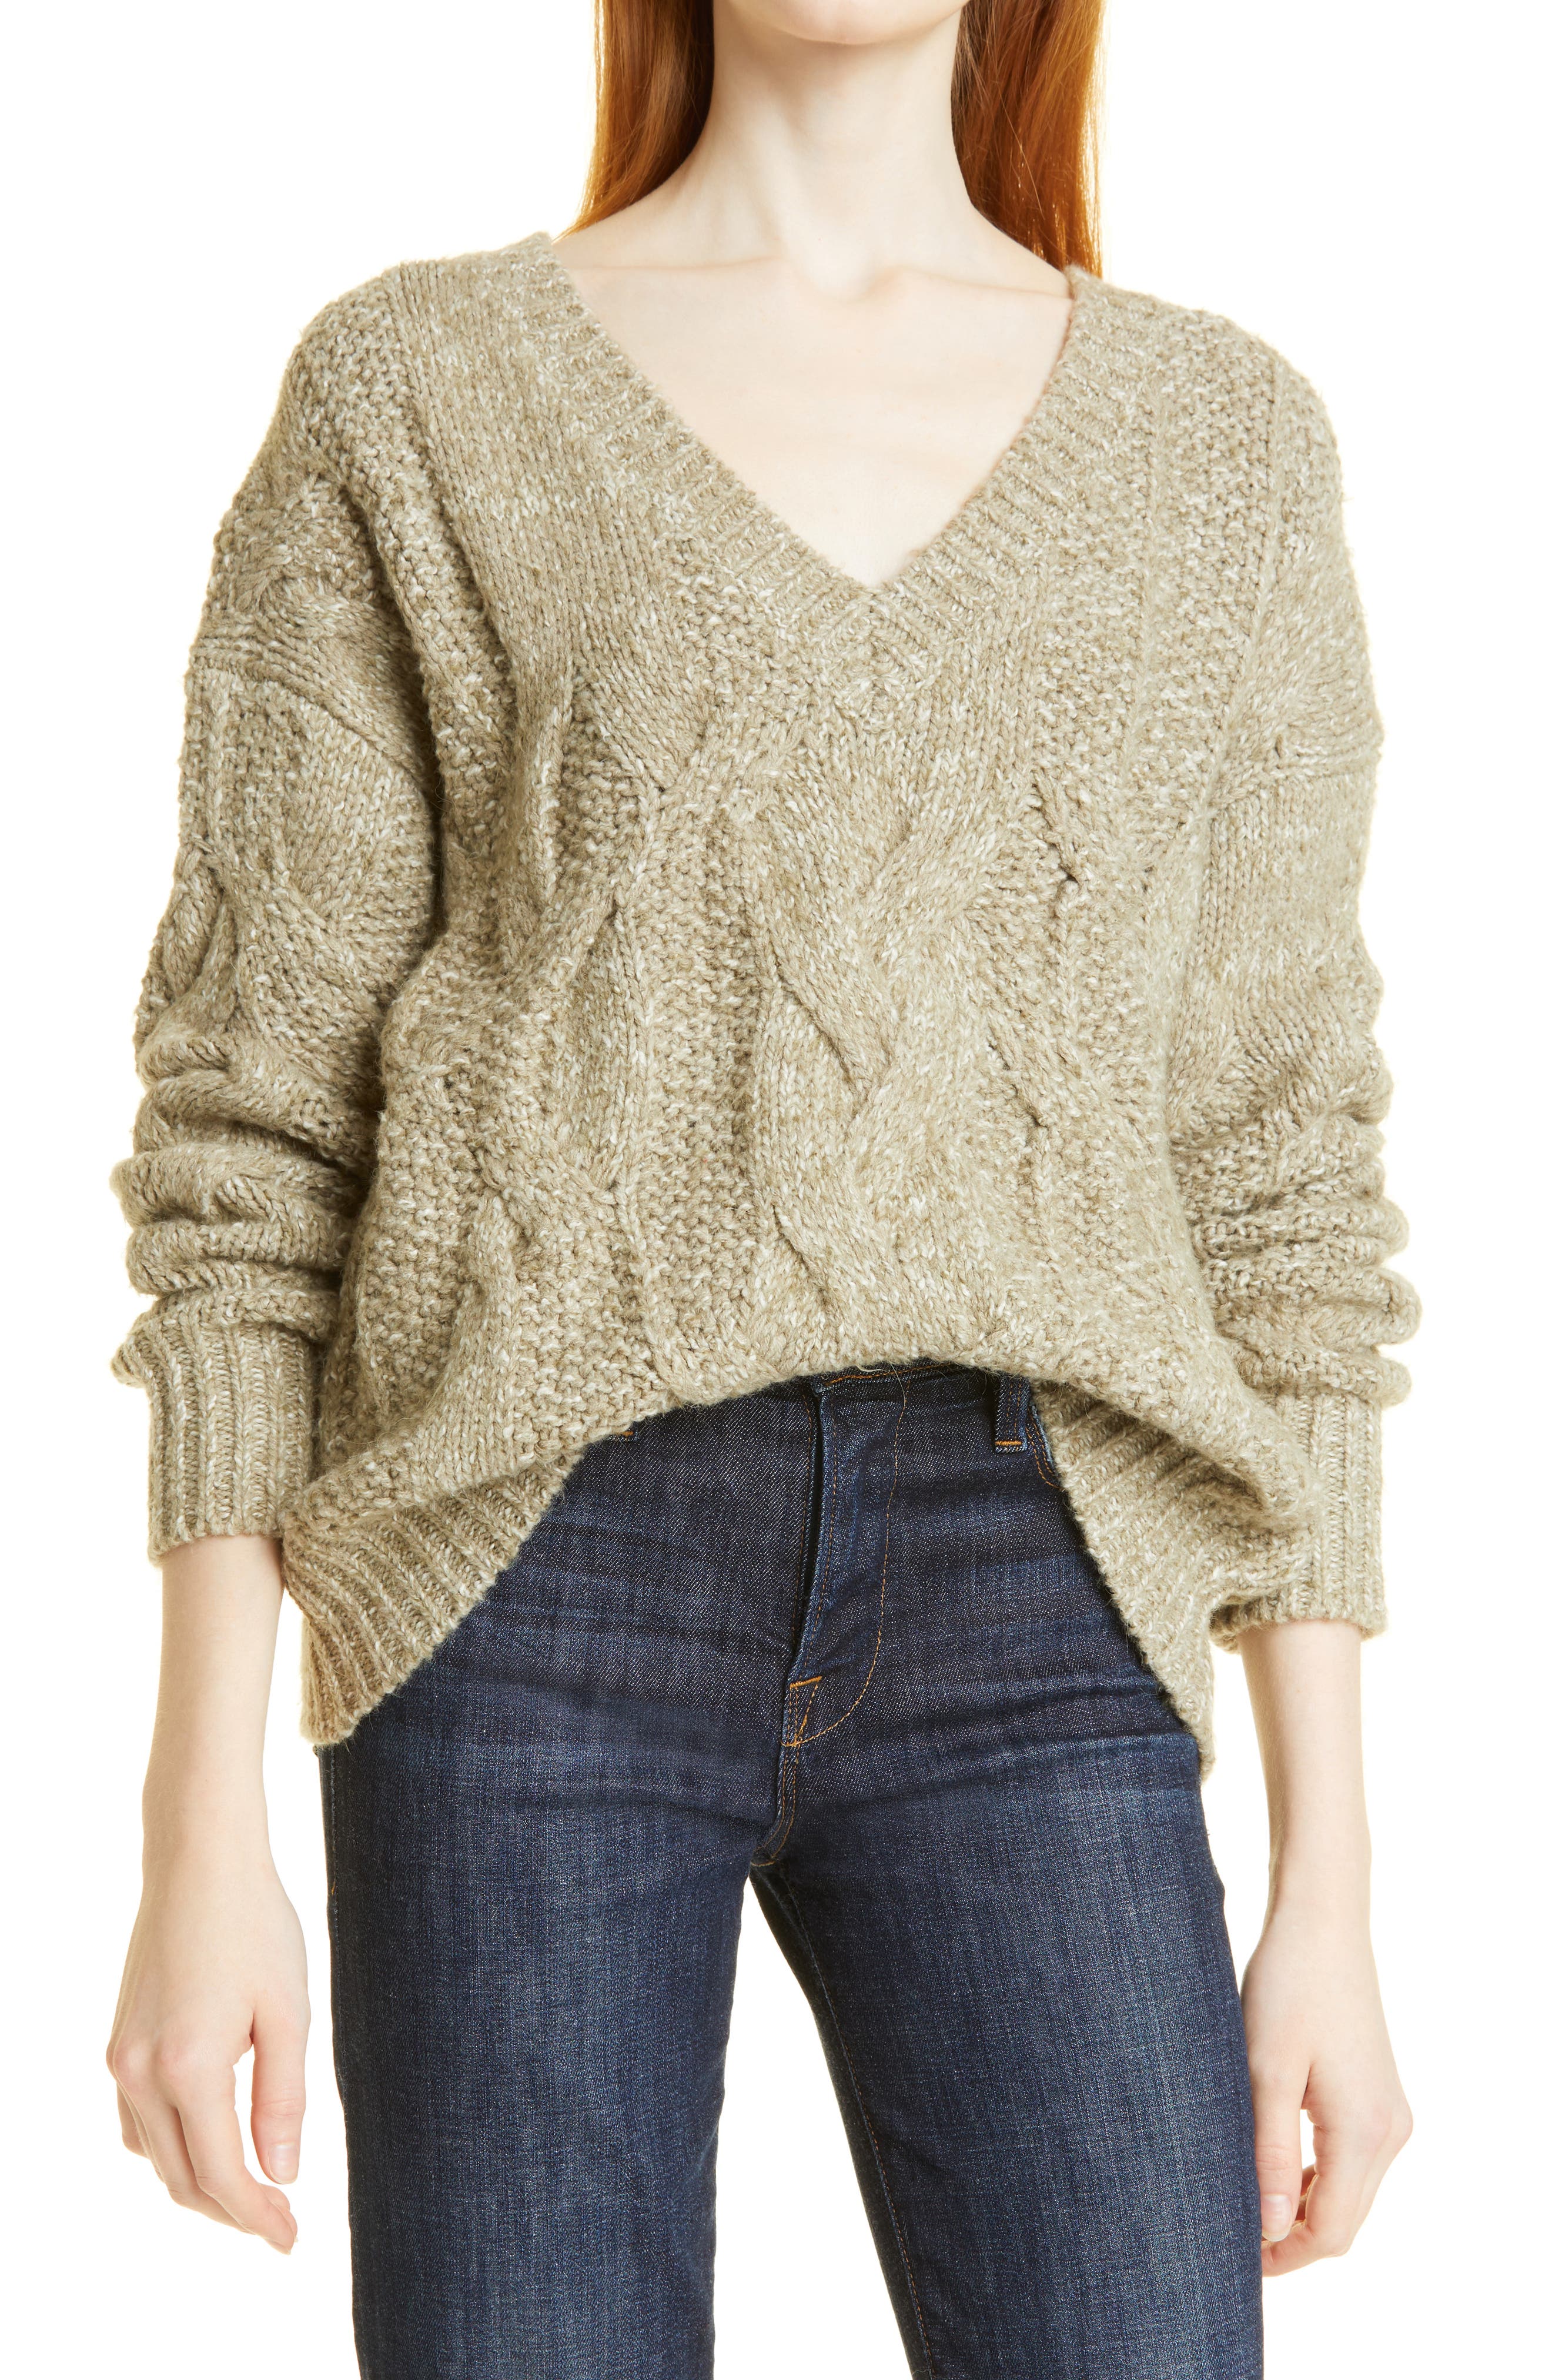 LINE & Label Alma Cable Knit Sweater in Willow at Nordstrom